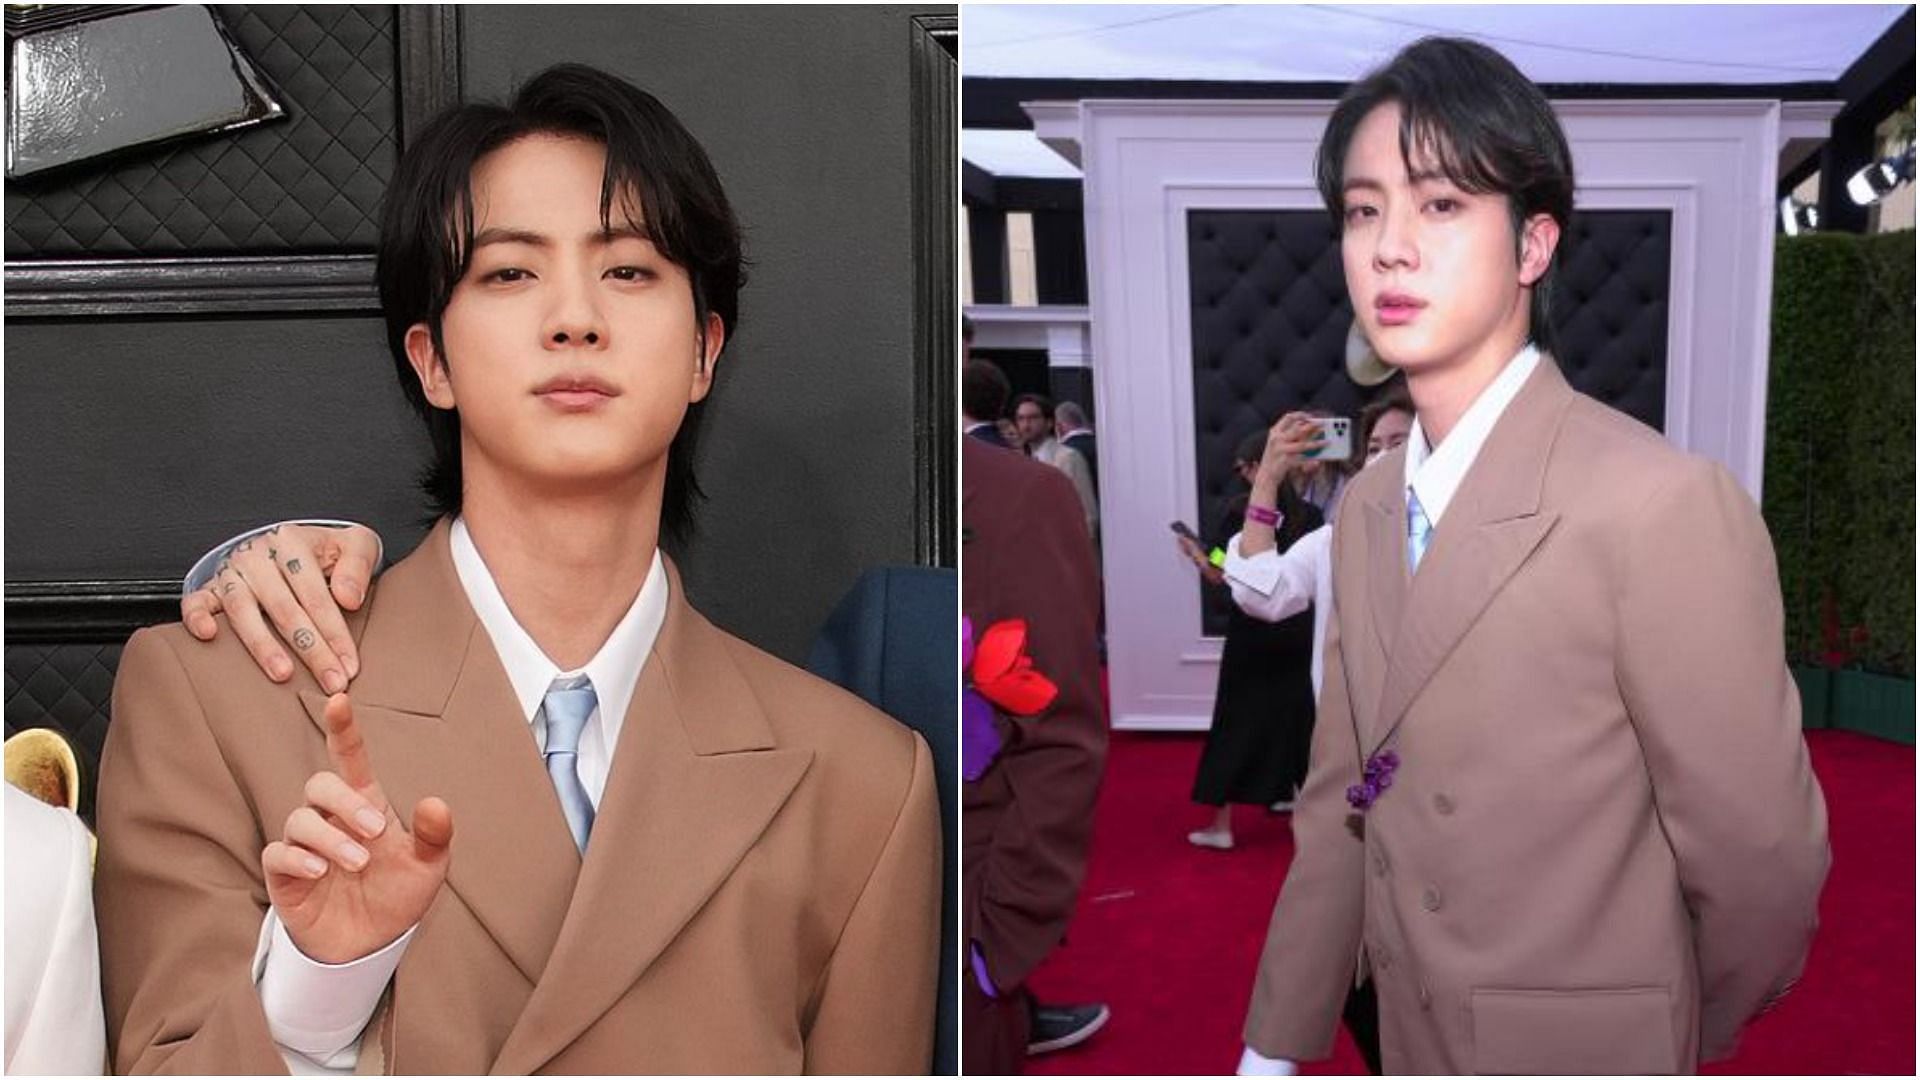 Why Did BTS's Jin Perform Sitting Down at the 2022 Grammys?